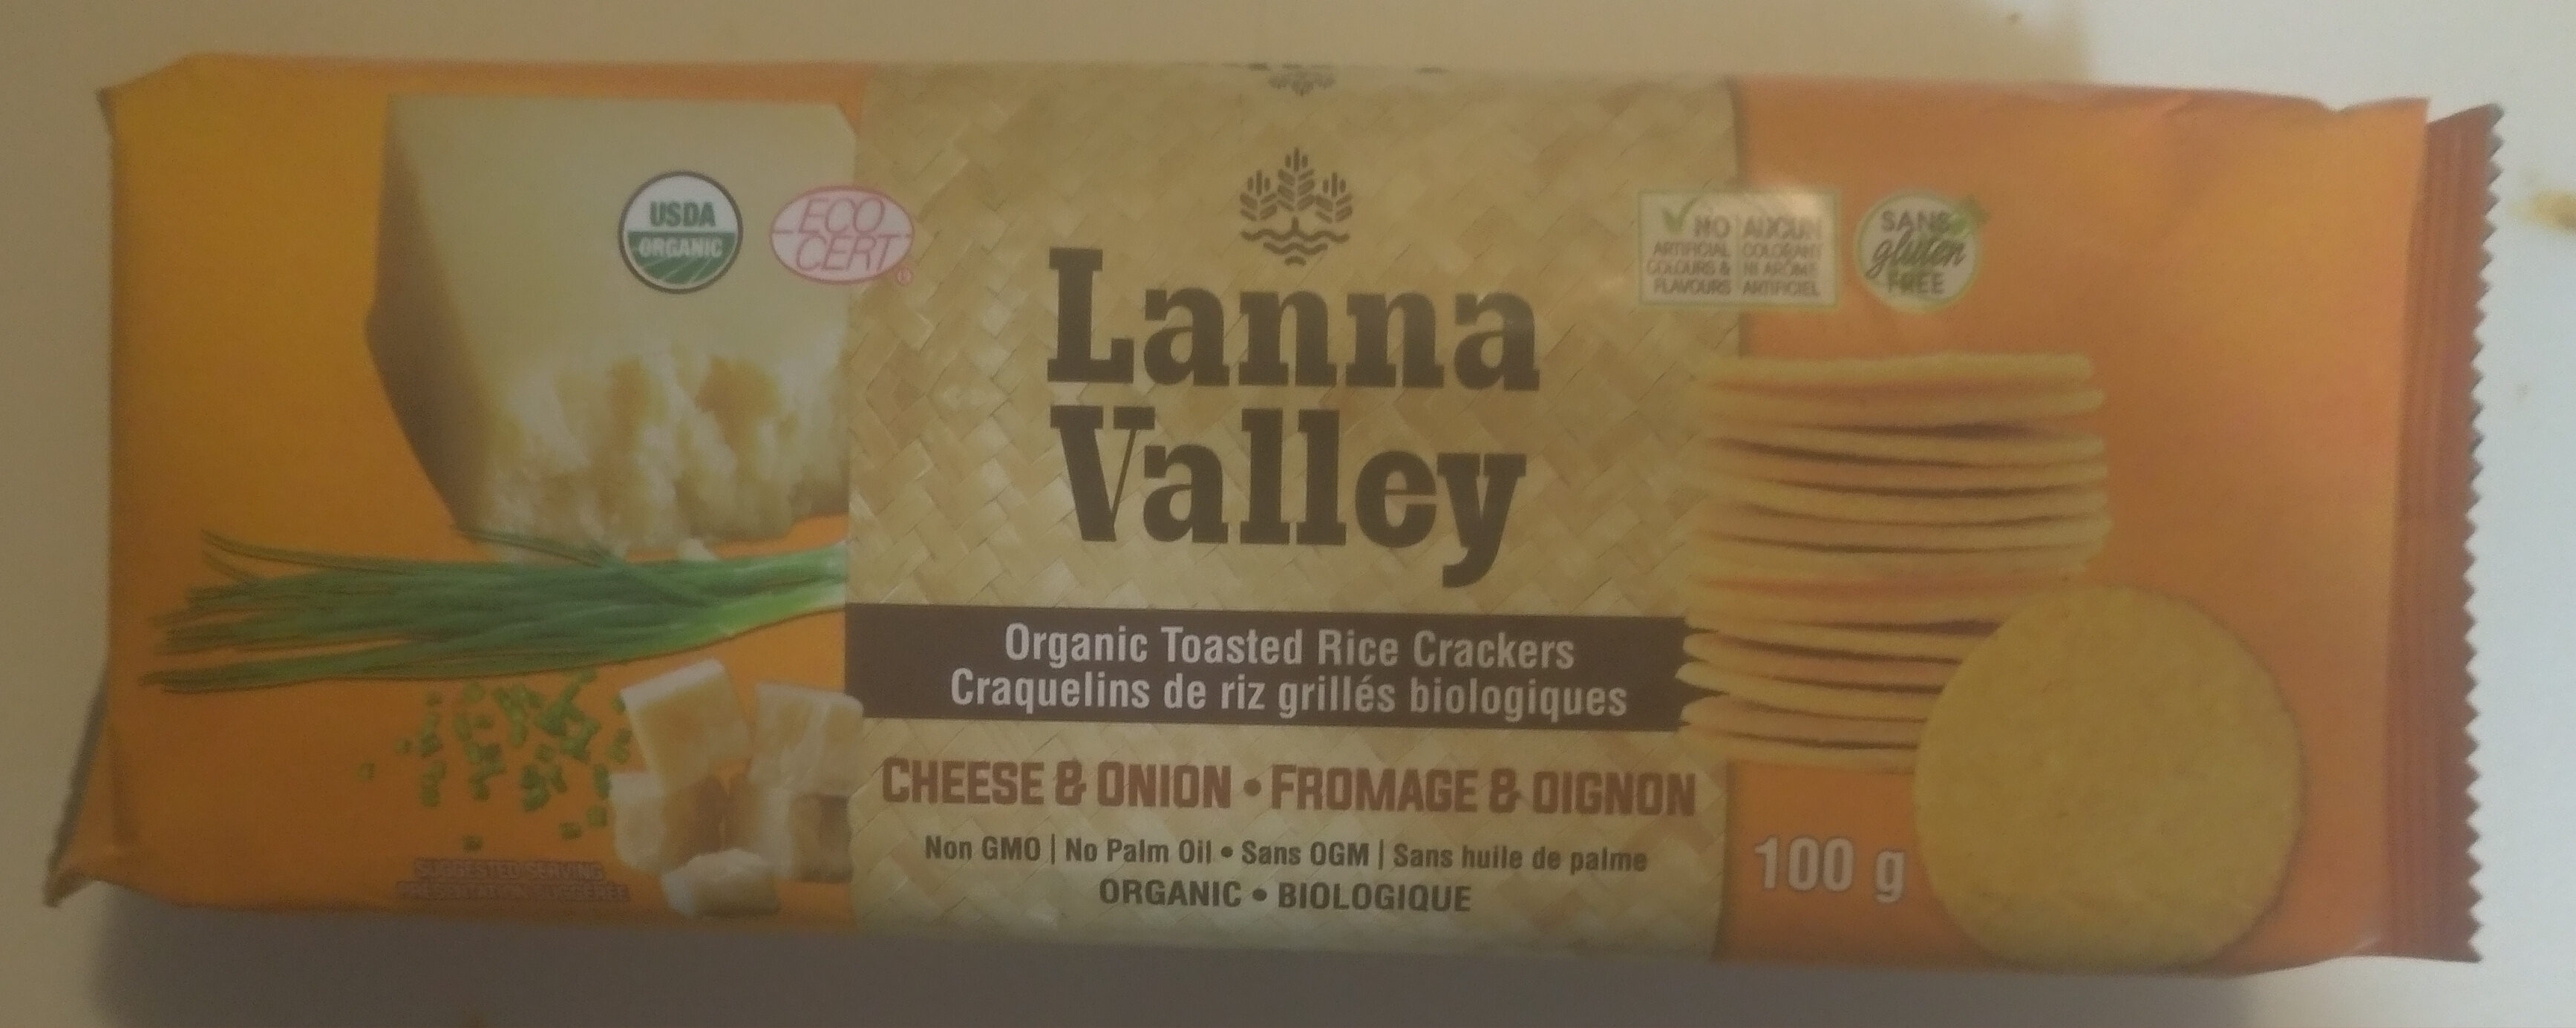 Cheese & Onion Organic Toasted Rice Crackers - Produkt - en